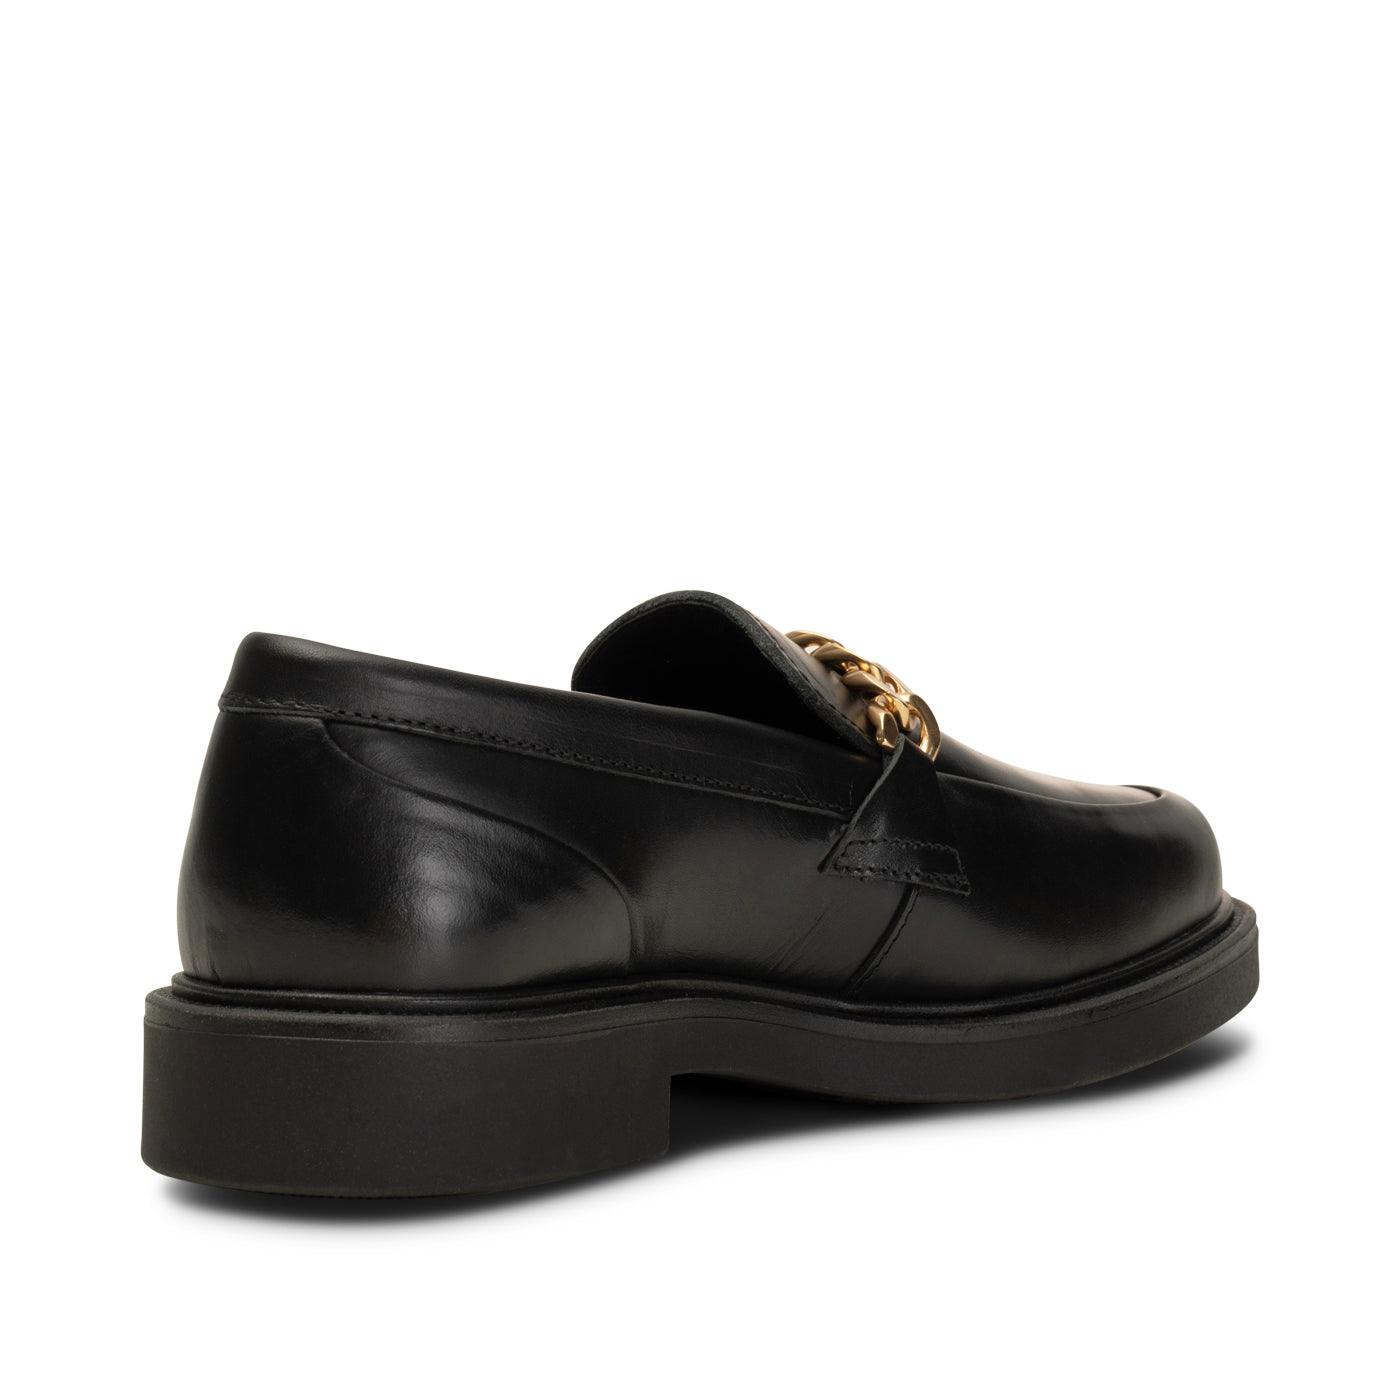 Shoe The Bear - Thyra Chain Loafer Leather - Black